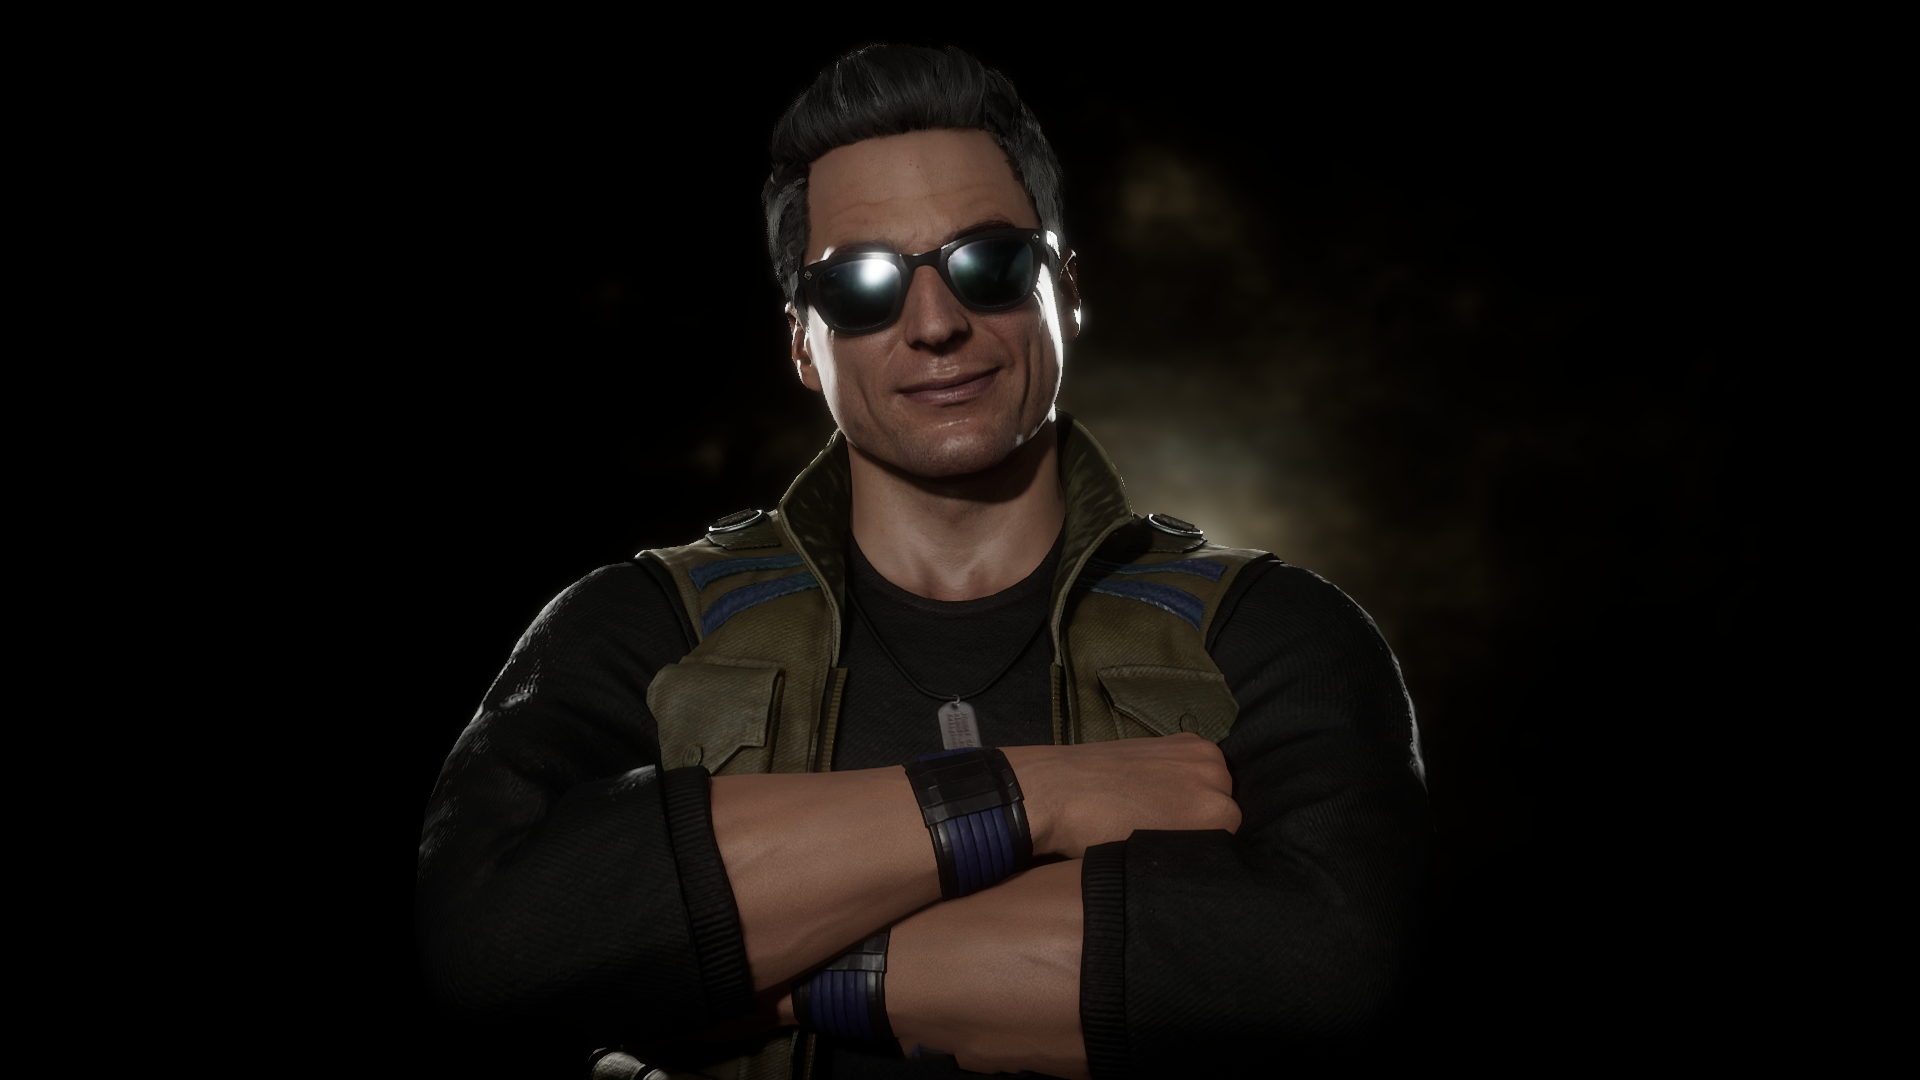 Johnny Cage HD Wallpaper and Background